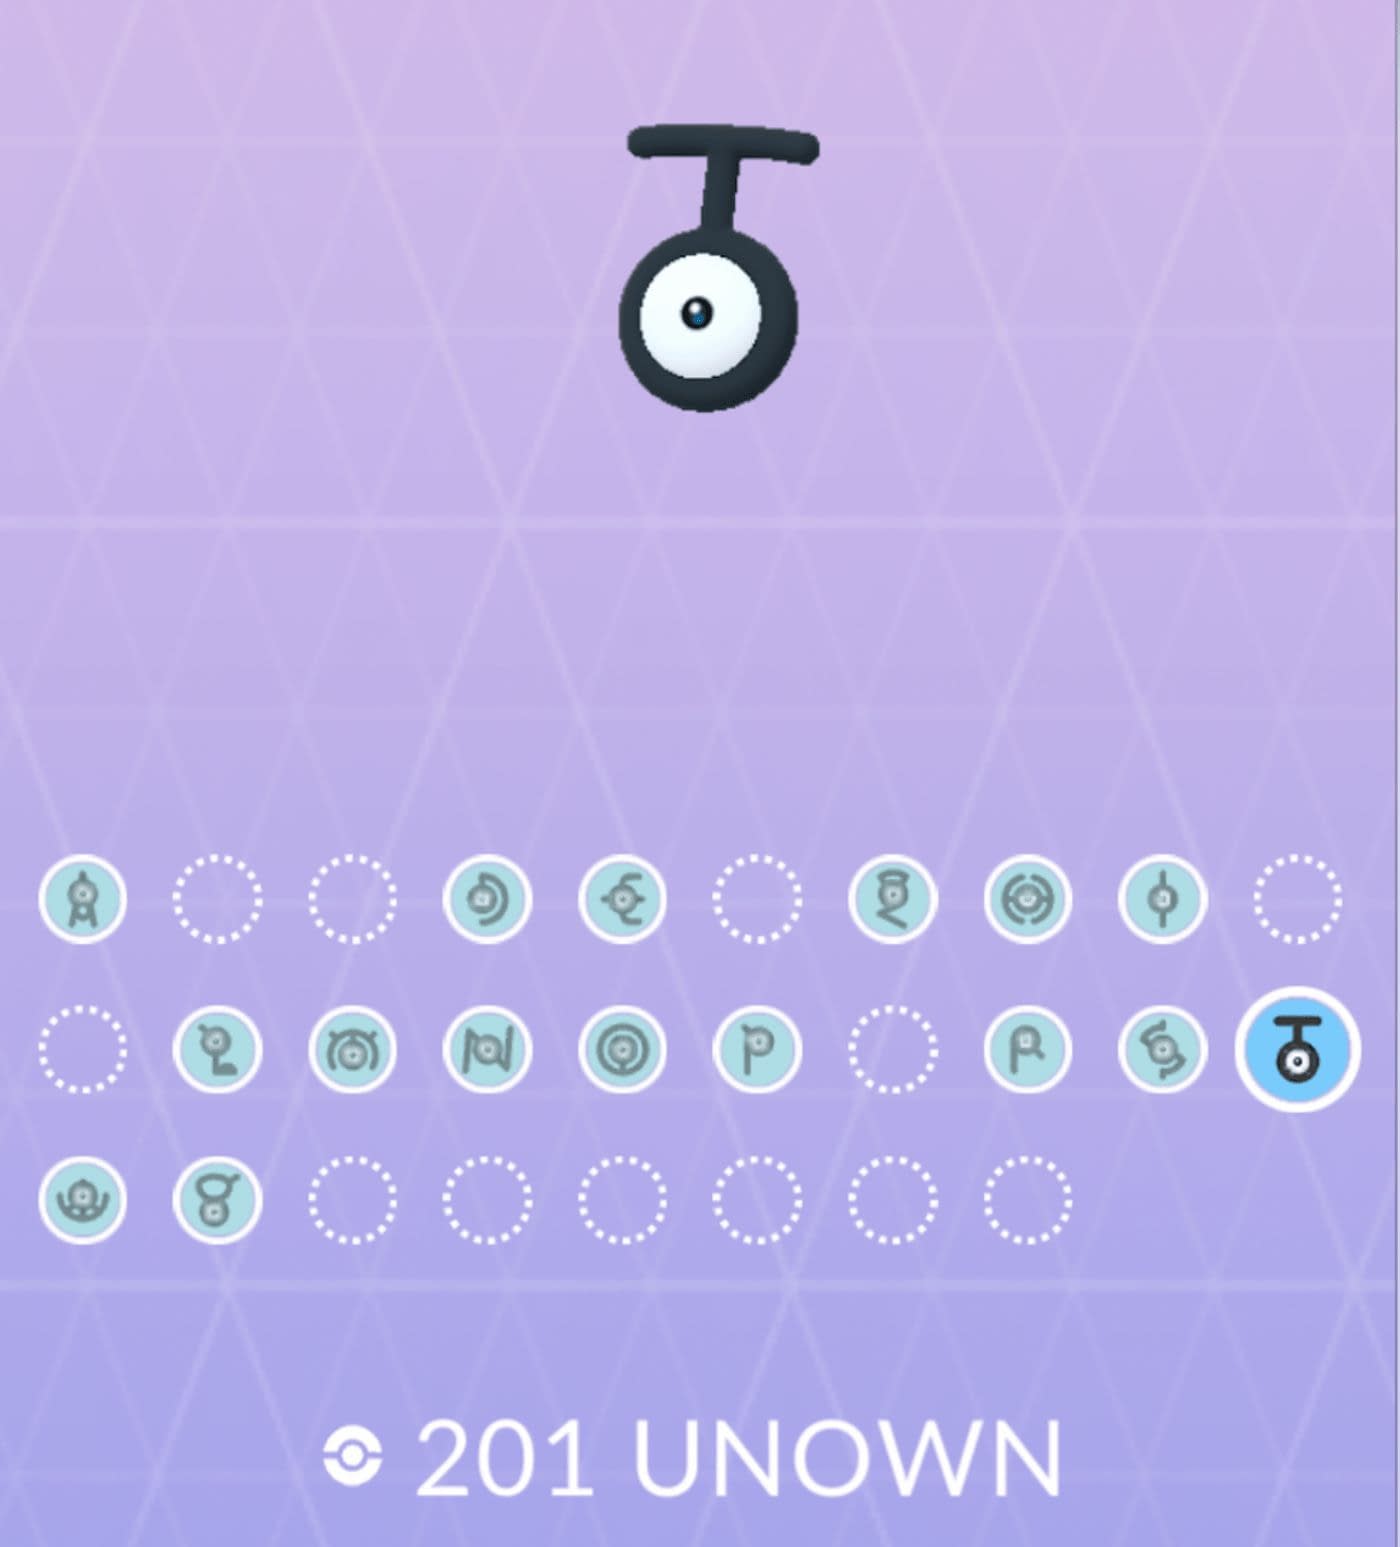 Where can I get the „?“ unown sometime soon? : r/pokemongo